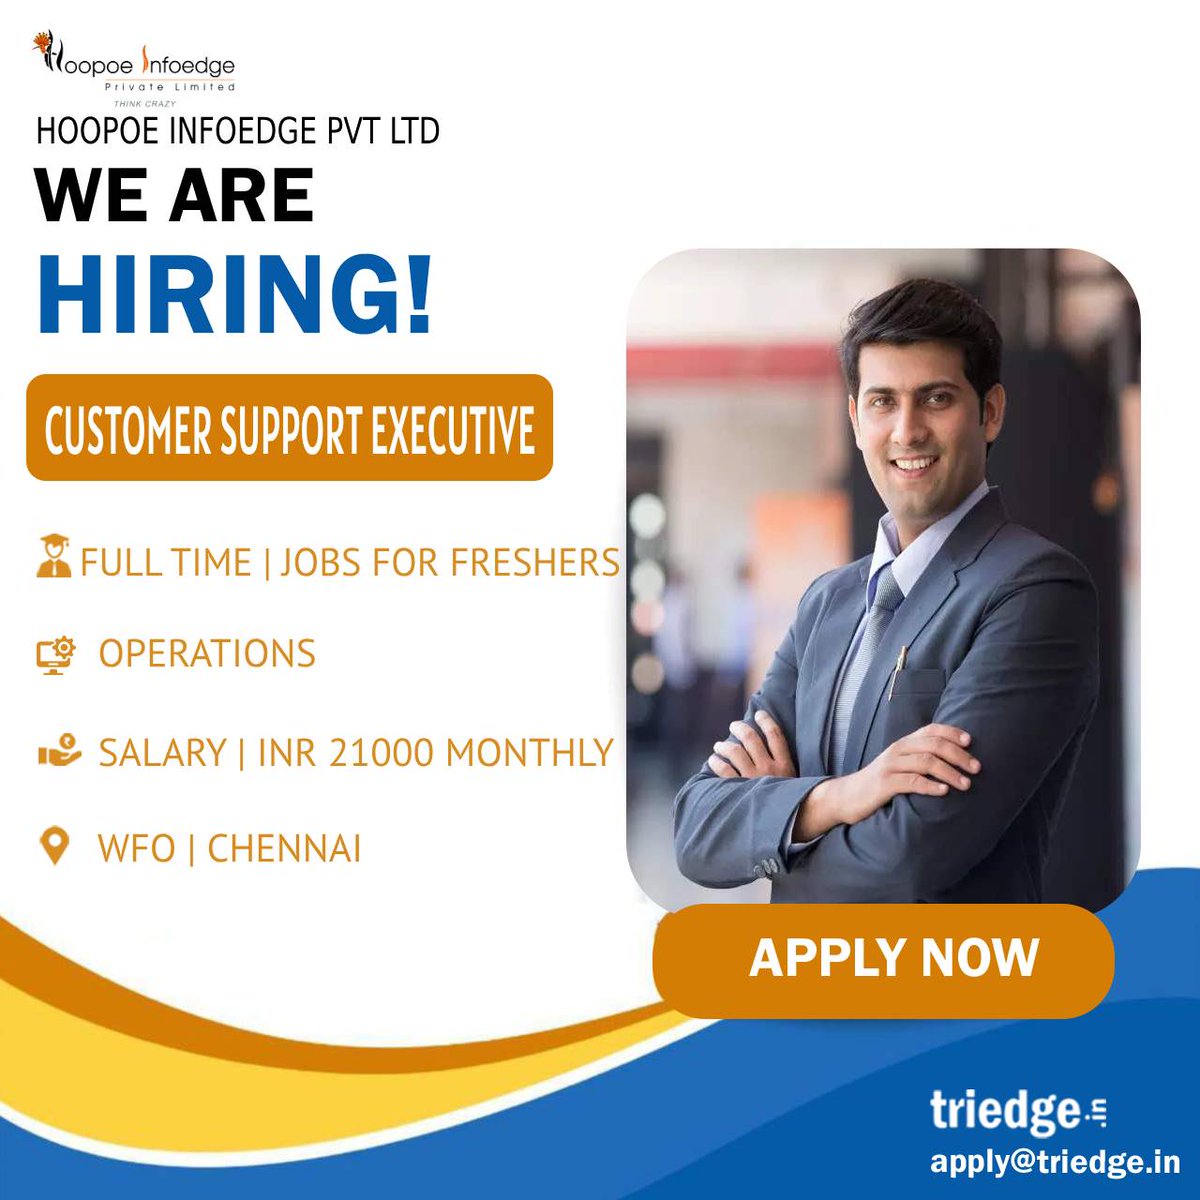 Hoopoe Infoedge Pvt Ltd is providing opportunities for the role of Customer Support Executive. Apply with your resume at apply@triedge.in.